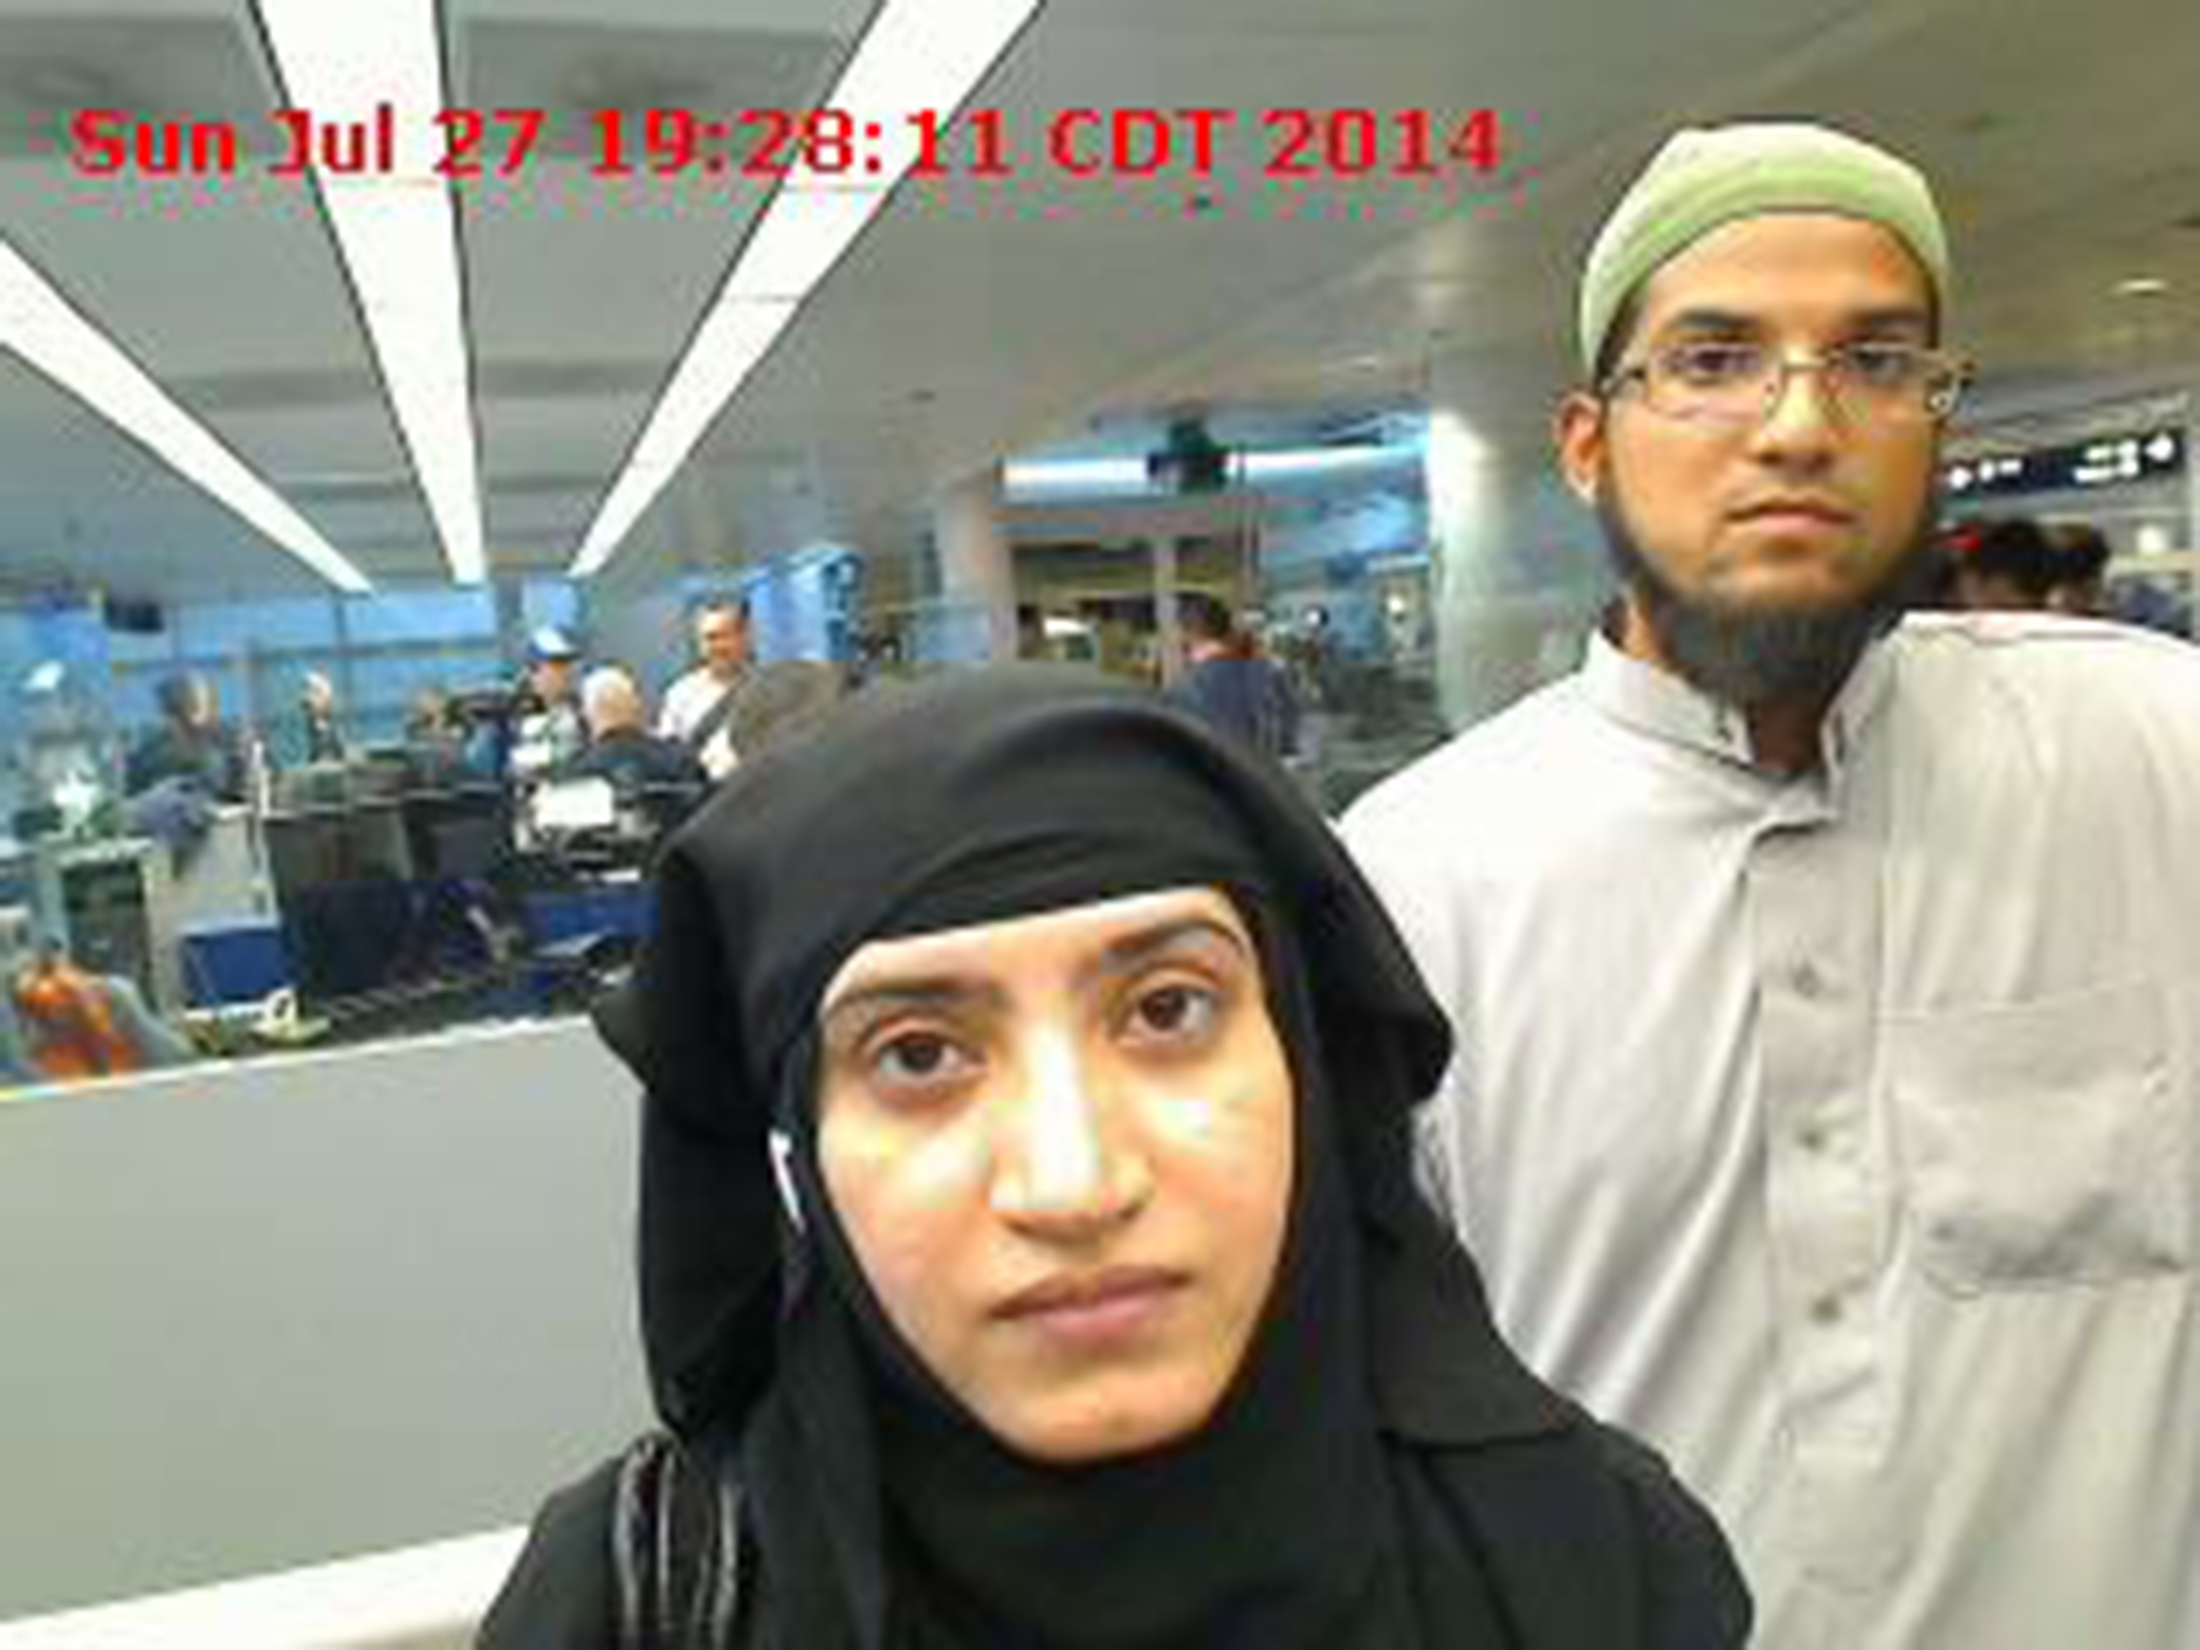 Tashfeen Malik, left, and Syed Rizwan Farook are pictured passing through Chicago's O'Hare International Airport in this July 27, 2014, handout photo obtained by Reuters on Dec. 8, 2015 (US Customs and Border Protection—Handout/Reuters)